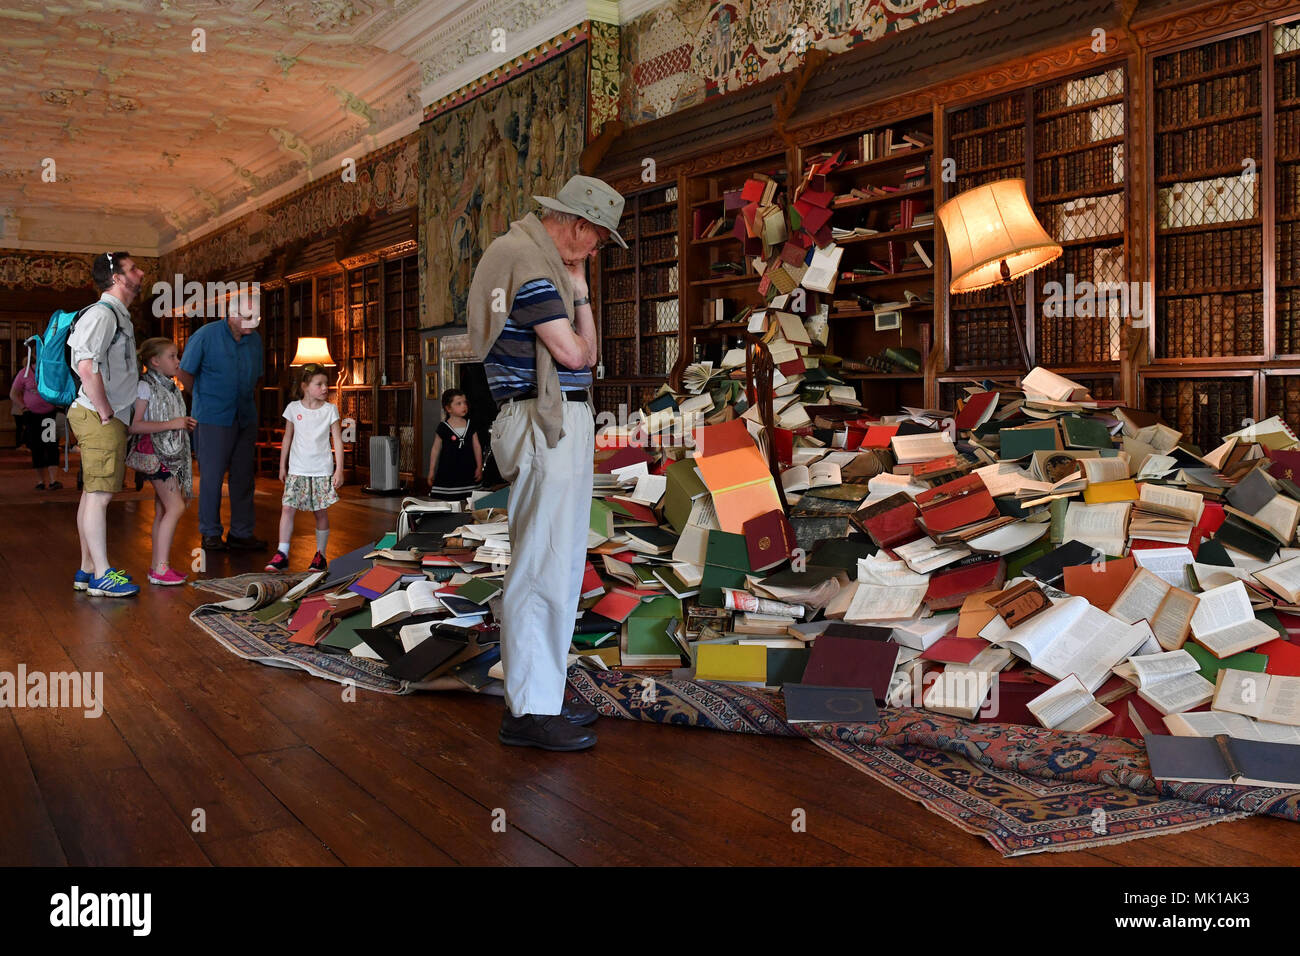 Visitors view a cascade of books flowing from bookcases at Blickling Hall in Norfolk as part of the new art installation 'The Word Defiant!' which reveals stories of books that have been banned, burned, redacted, drowned, neglected and superseded. Stock Photo